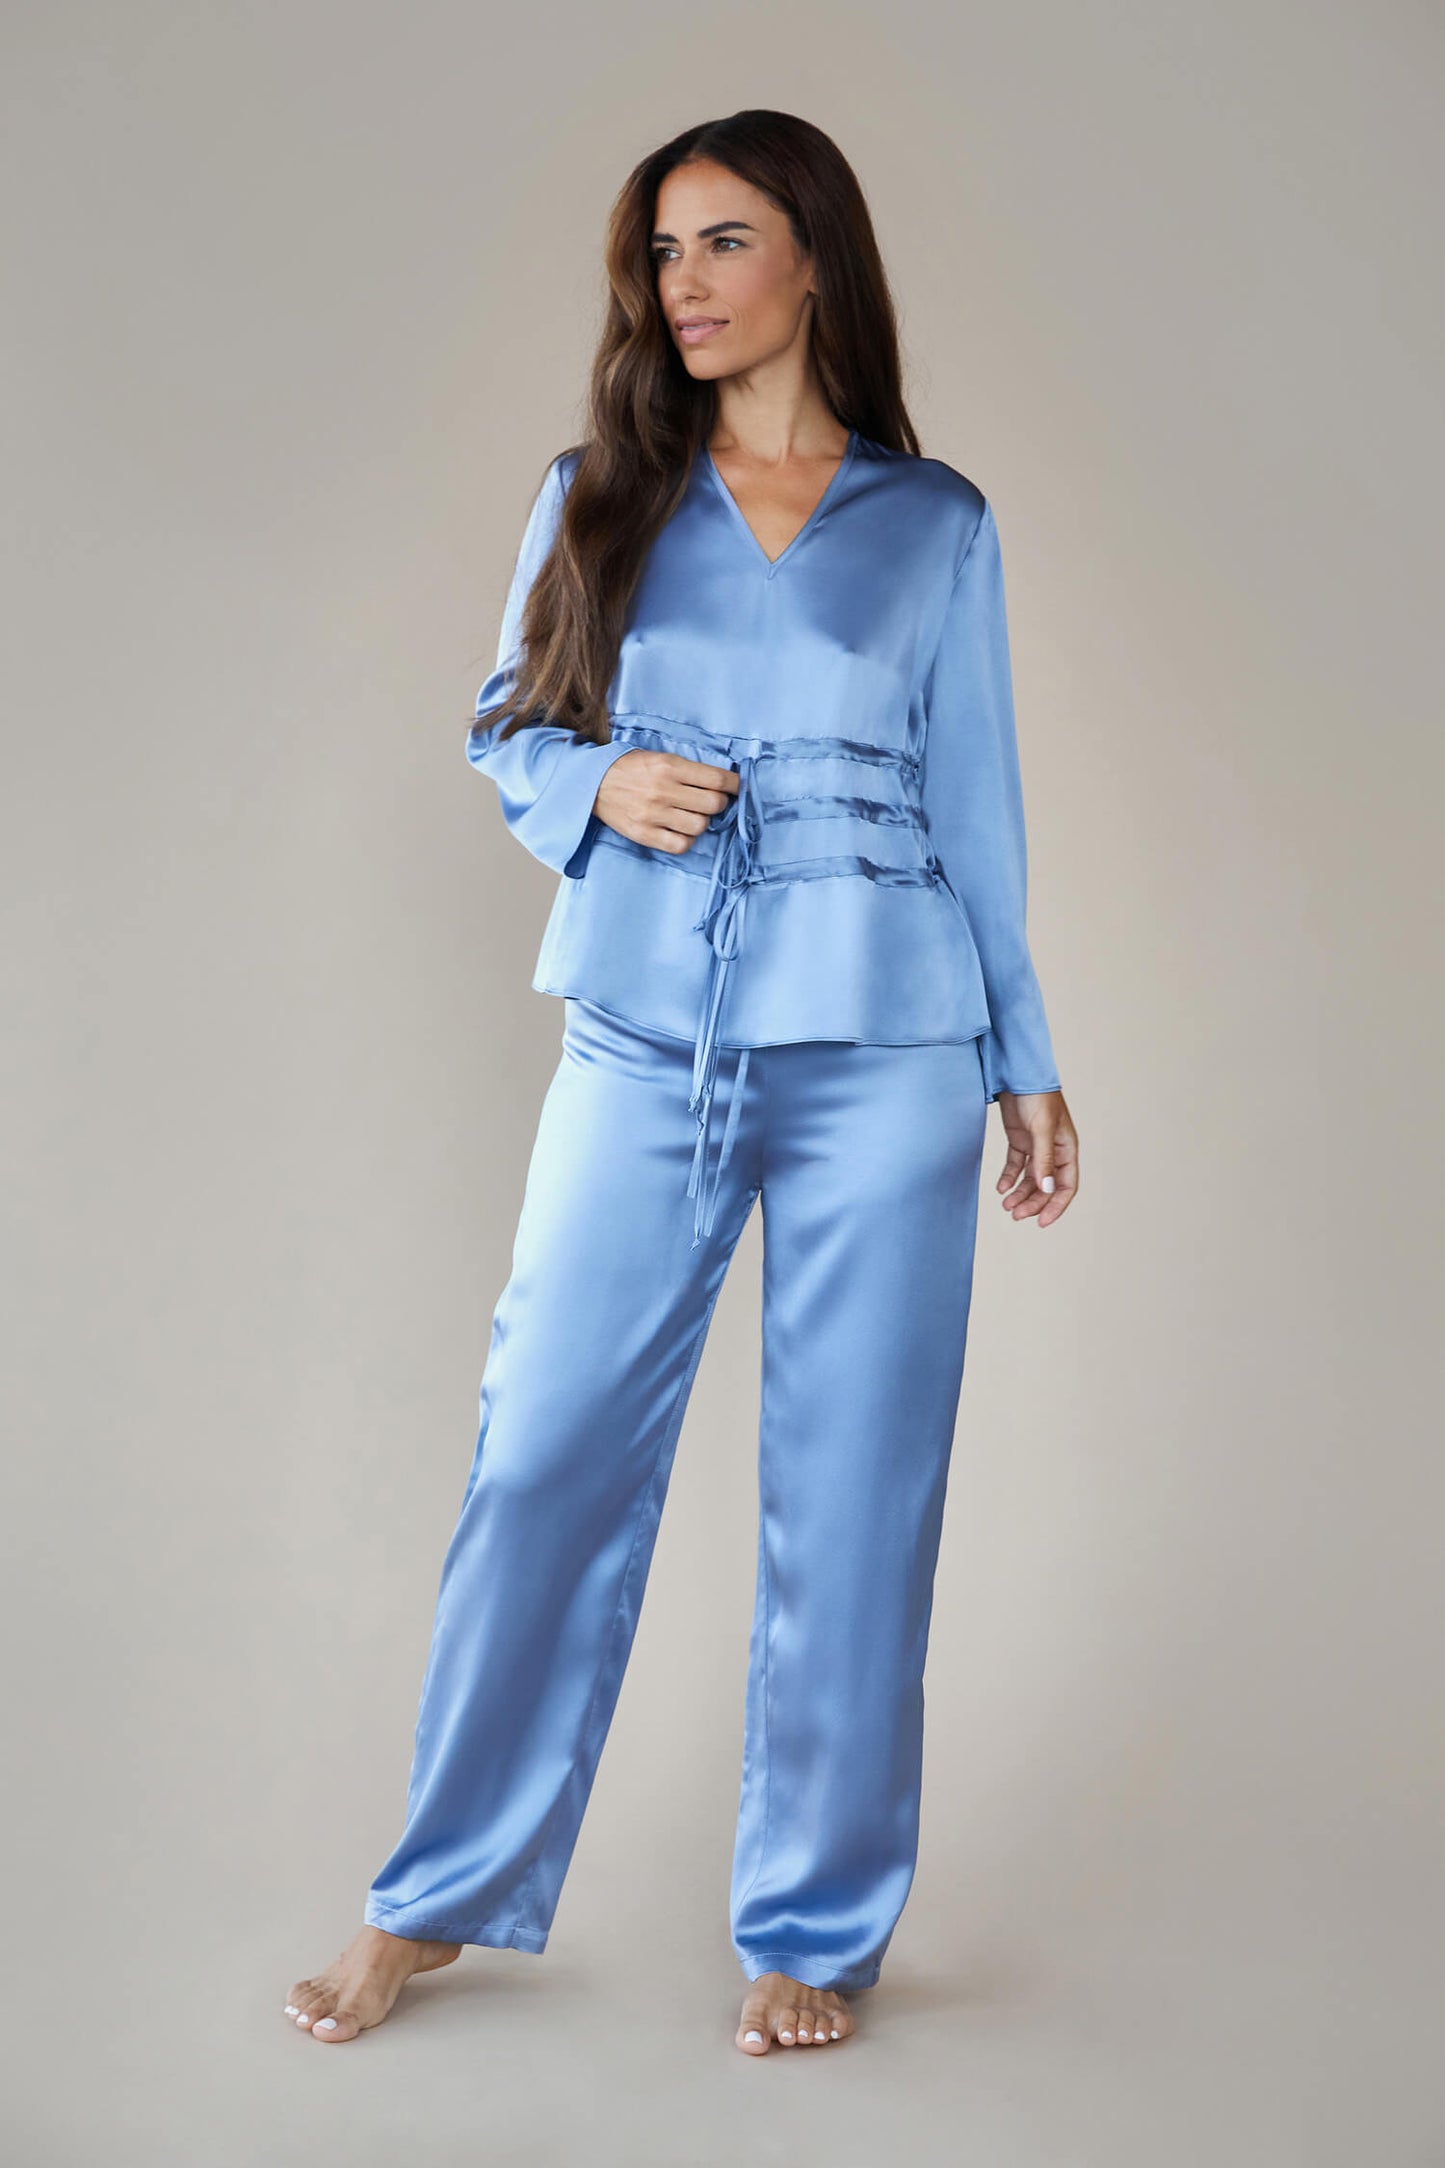 Model wears silk satin loungewear set in colour pewter sky (blue). Her top is a long sleeved, V neck top. It is shown with the waist ties untied to give a loose, easy fit rather than the corseted style waist. She wears straight legged pyjama style silk trousers with a drawstring, elasticated waist. 